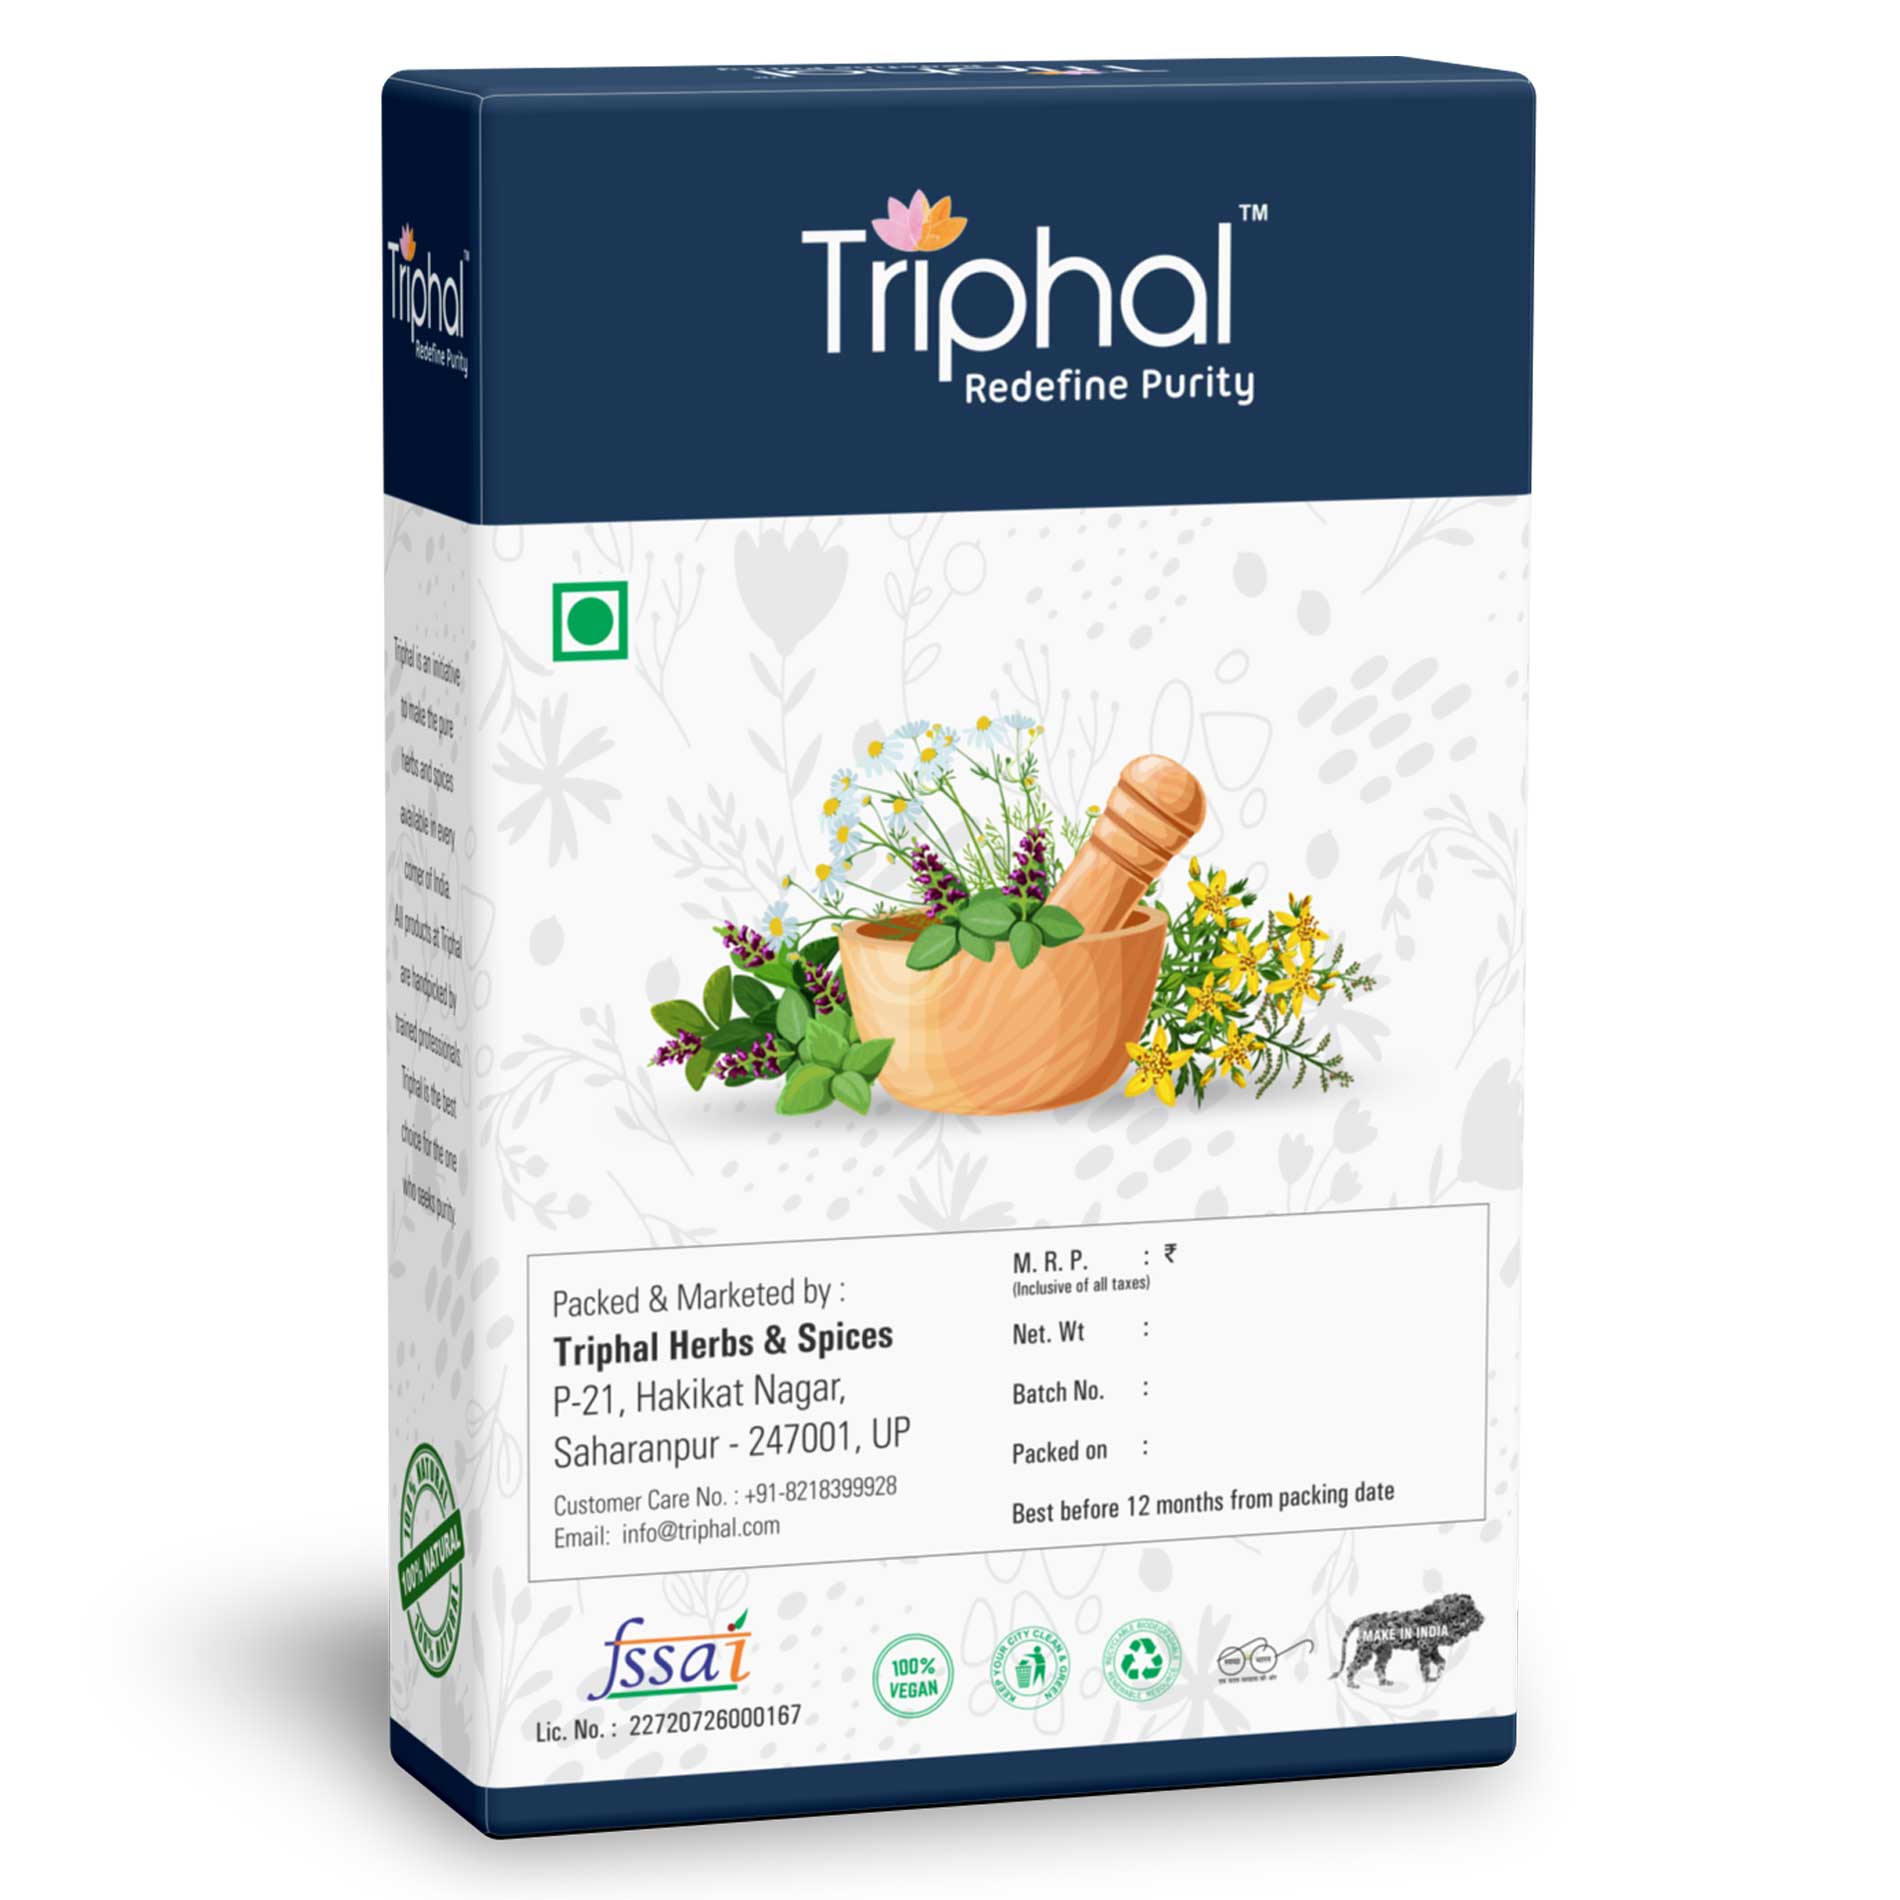 7 in 1 Super Food - contains almonds, pumpkin seeds, sunflower seeds, sesame seeds, cashew, chia seeds, flax seeds by Triphal